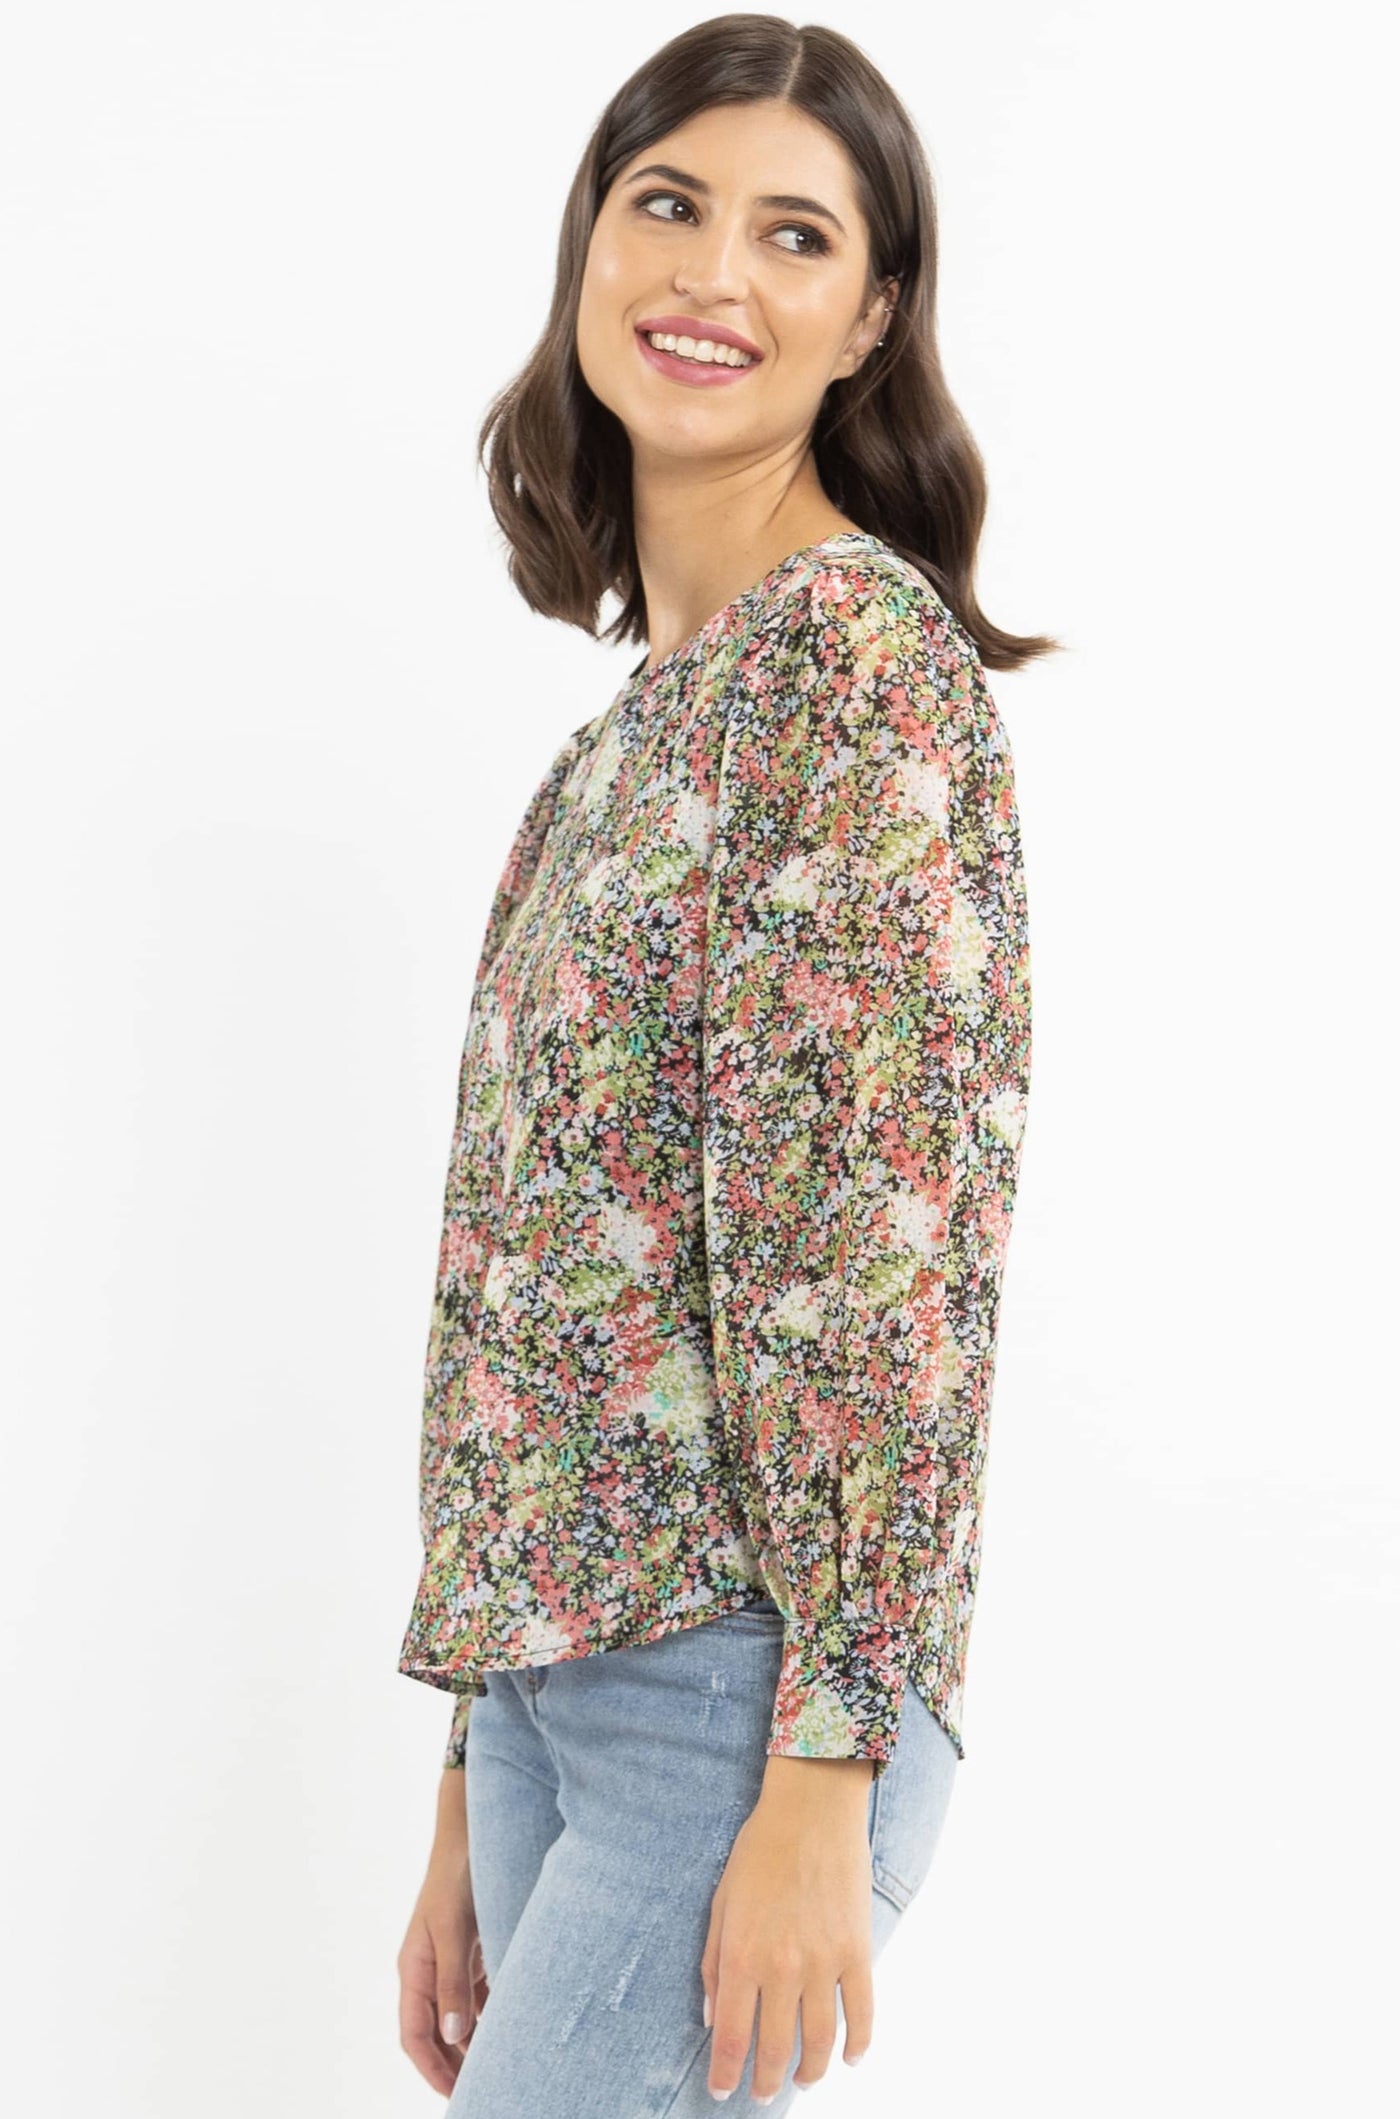 LEILA + Luca Forever Top - Multi Floral  The Leila + Luca Forever Top is a gorgeous feminine long sleeve which can easily be dressed up or down.  It features elasticated ruched sleeve cuffs, each sporting a single ruffle, finished with a gently curved hemline dropping slightly lower at the back and keyhole closure.      Sizes; 8, 10, 12, 14     Elasticated ruched sleeve cuffs     Curved hemline     100% Polyester